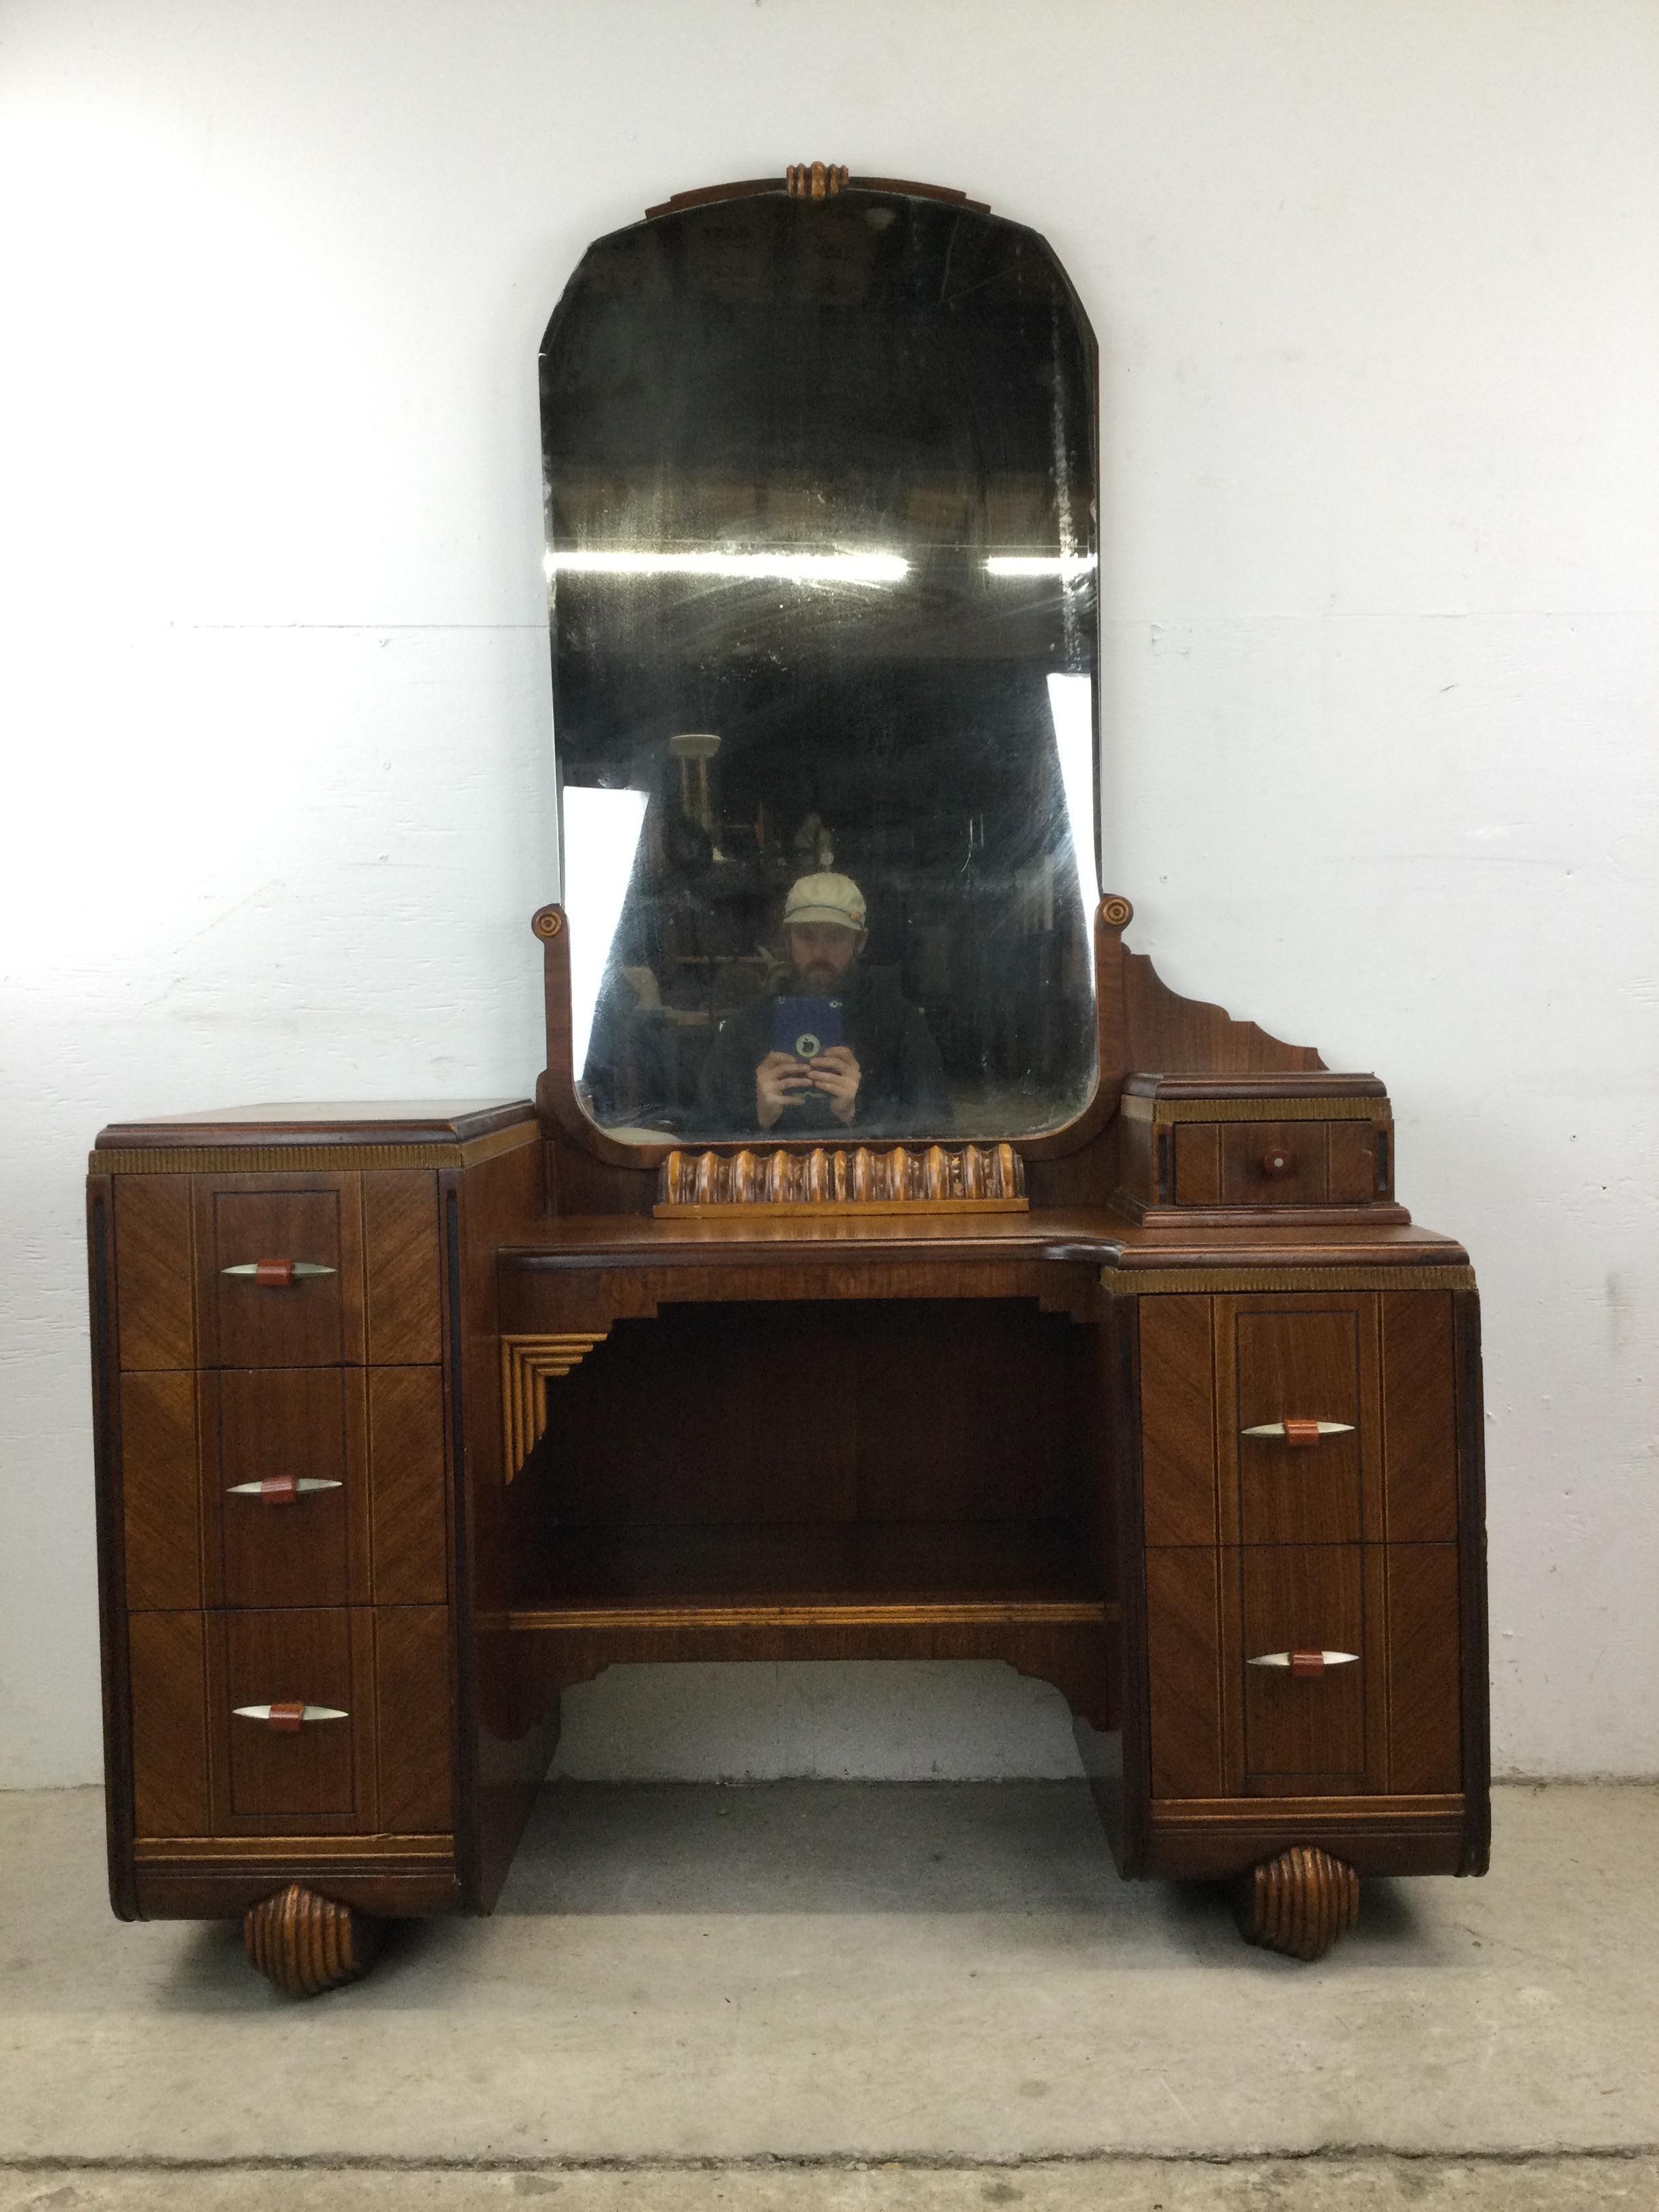 This antique Art Deco mirrored vanity features hardwood construction, beautiful walnut veneer with original finish, six dovetailed drawers with chrome & bakelite drawer pulls, attached antique mirror, and unique carved wood feet. Included is a